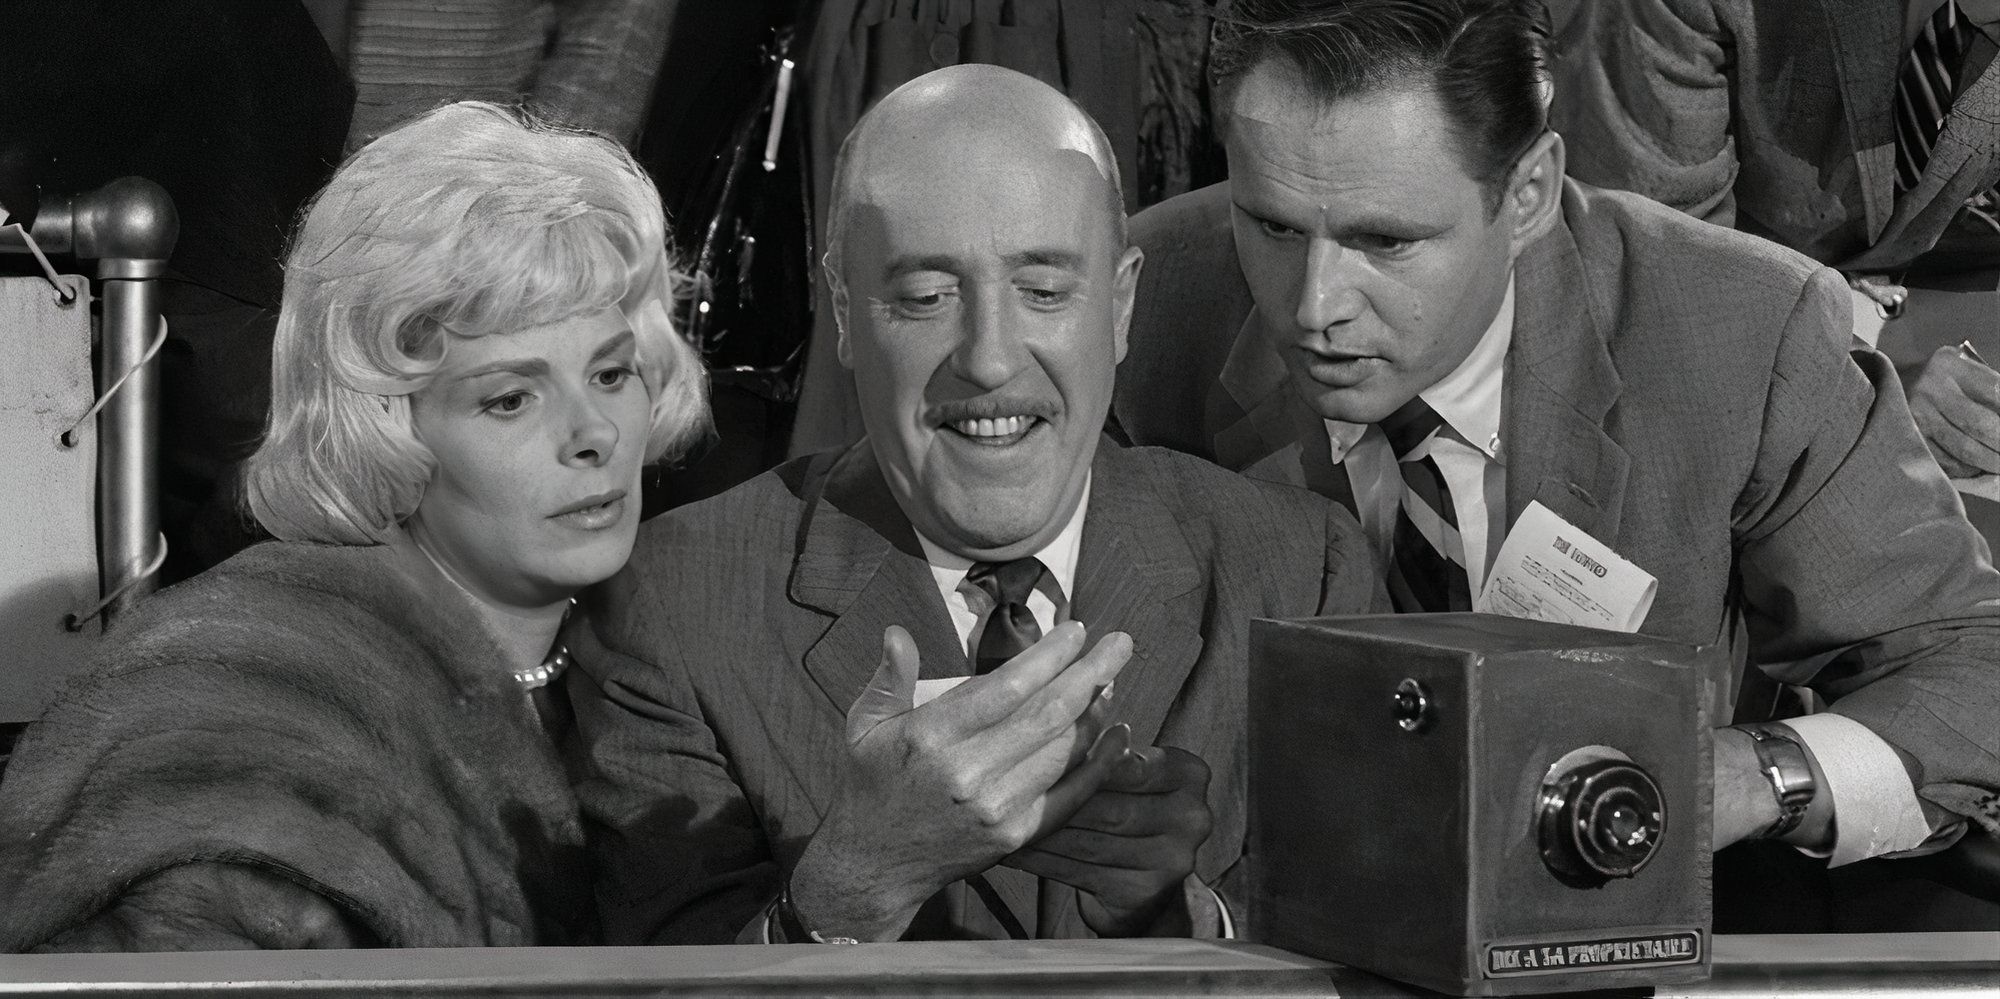 Joan Carson, Fred Clark and Adam Williams all sitting next to each other looking at a photo in Fred Clark's hand in The Twilight Zone